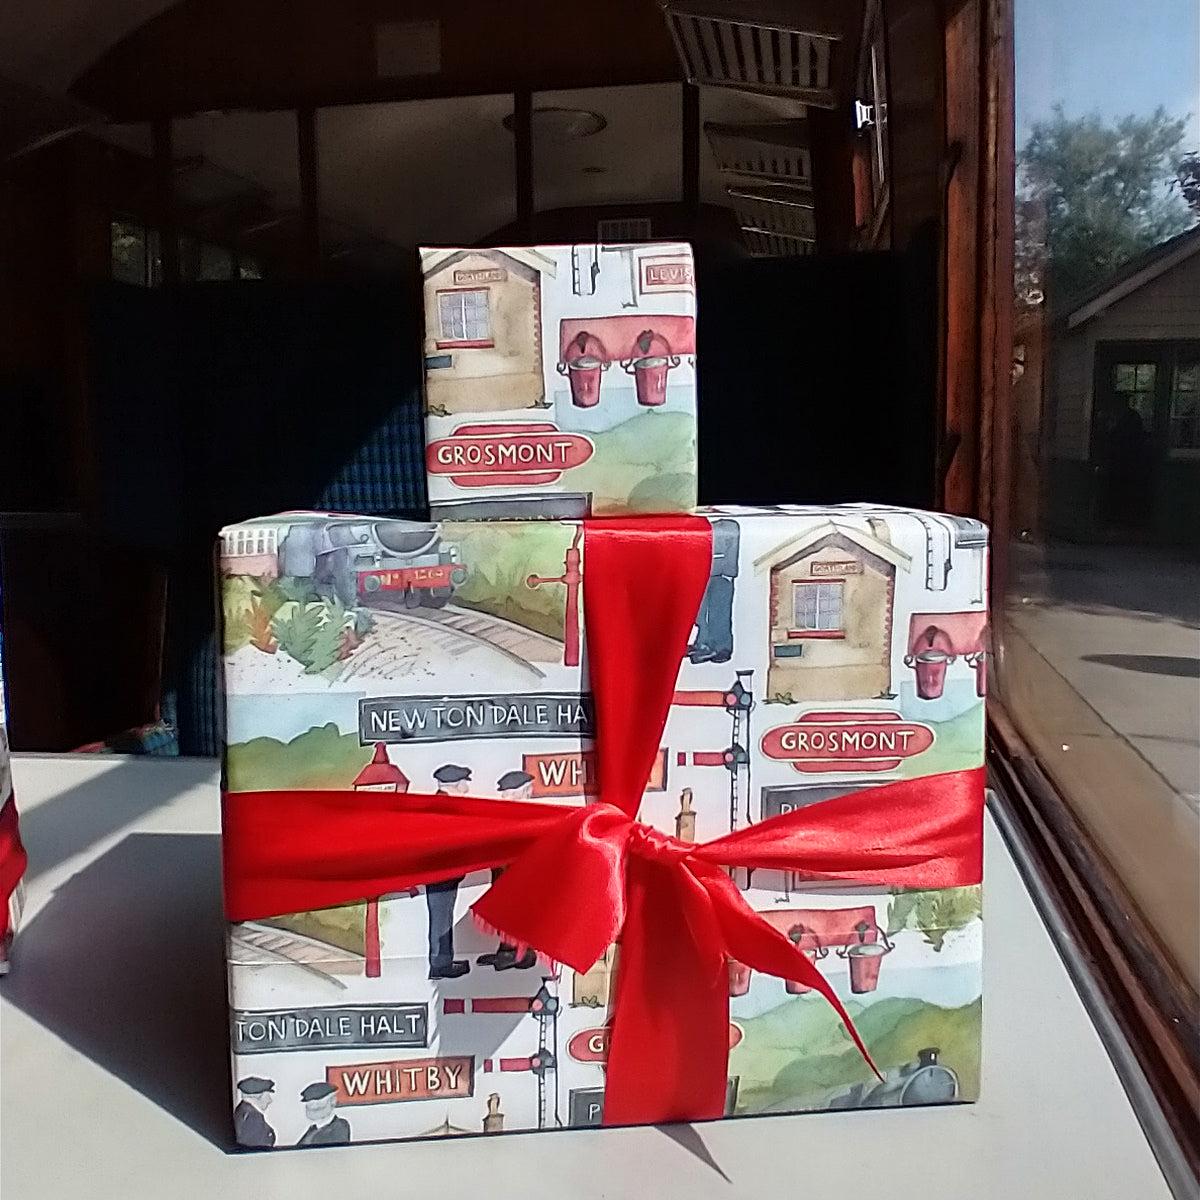 Parcels wrapped in Emma Ball wrapping paper on a table in a carriage window.